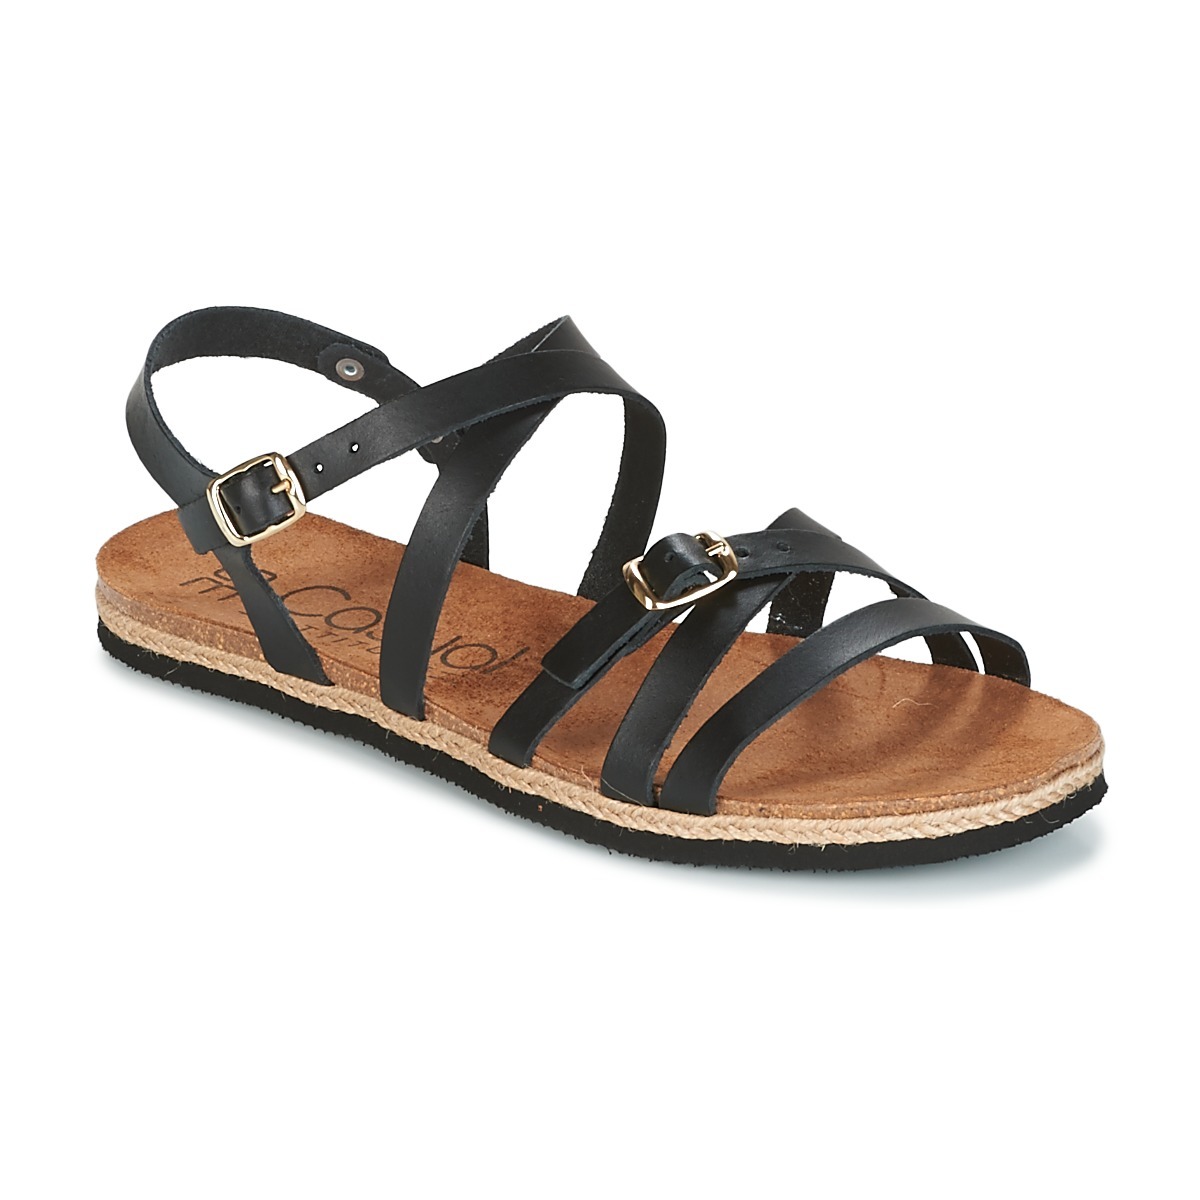 Casualtitude - Black Sandals for Women from Spartoo GOOFASH